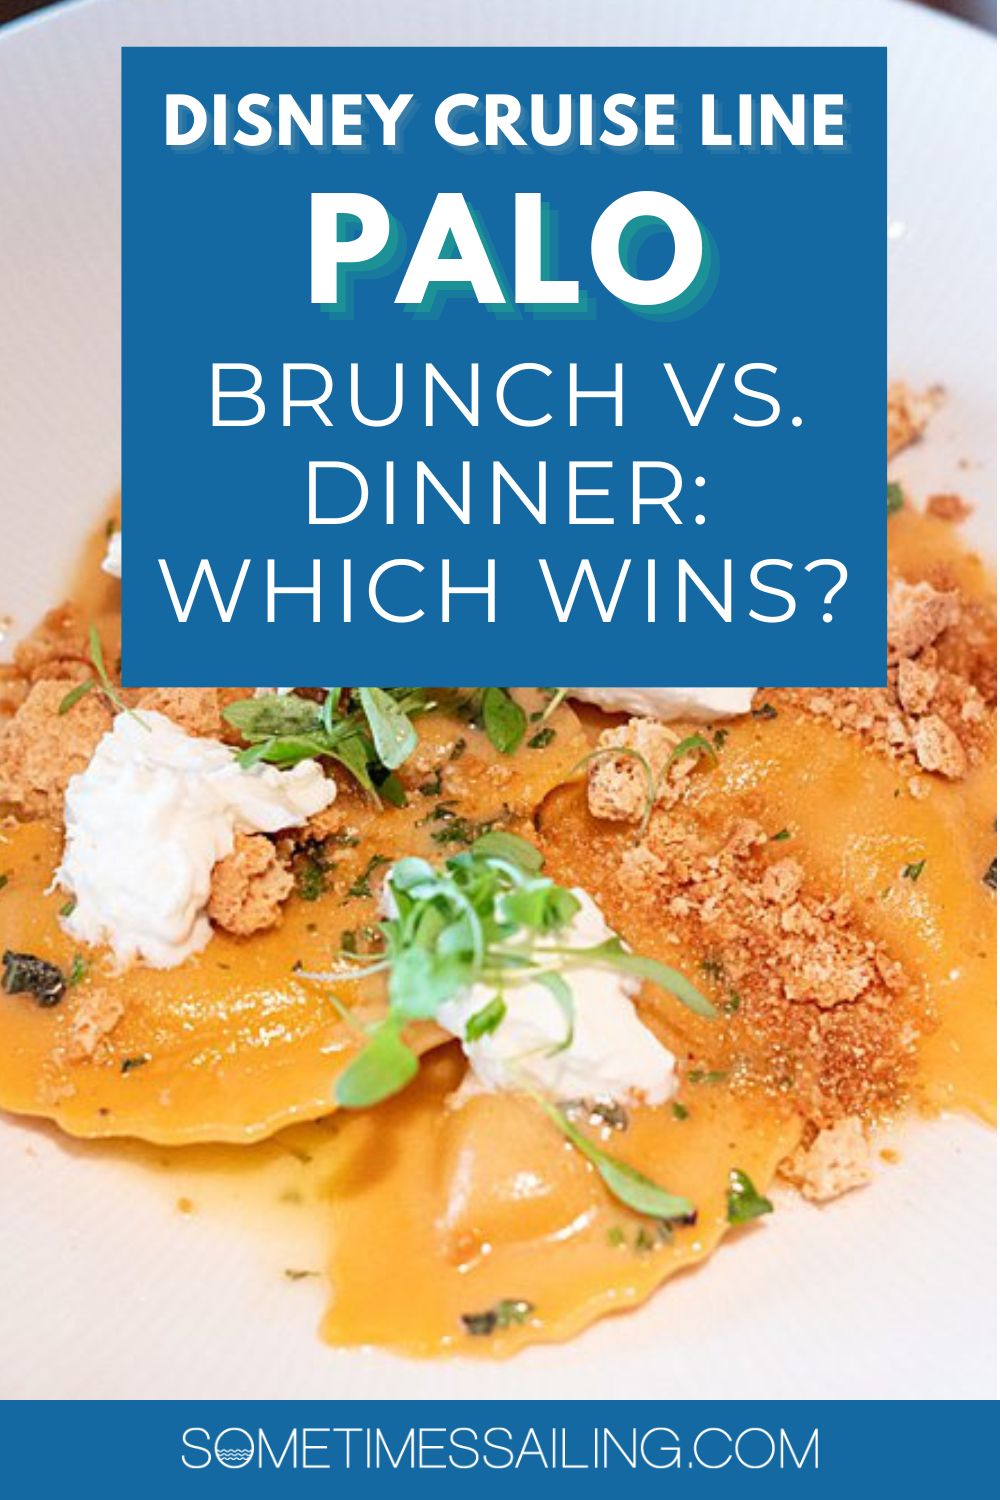 Palo brunch vs. dinner on Disney Cruise Line: Which Wins? With a photo of a ravioli dish underneath the text.